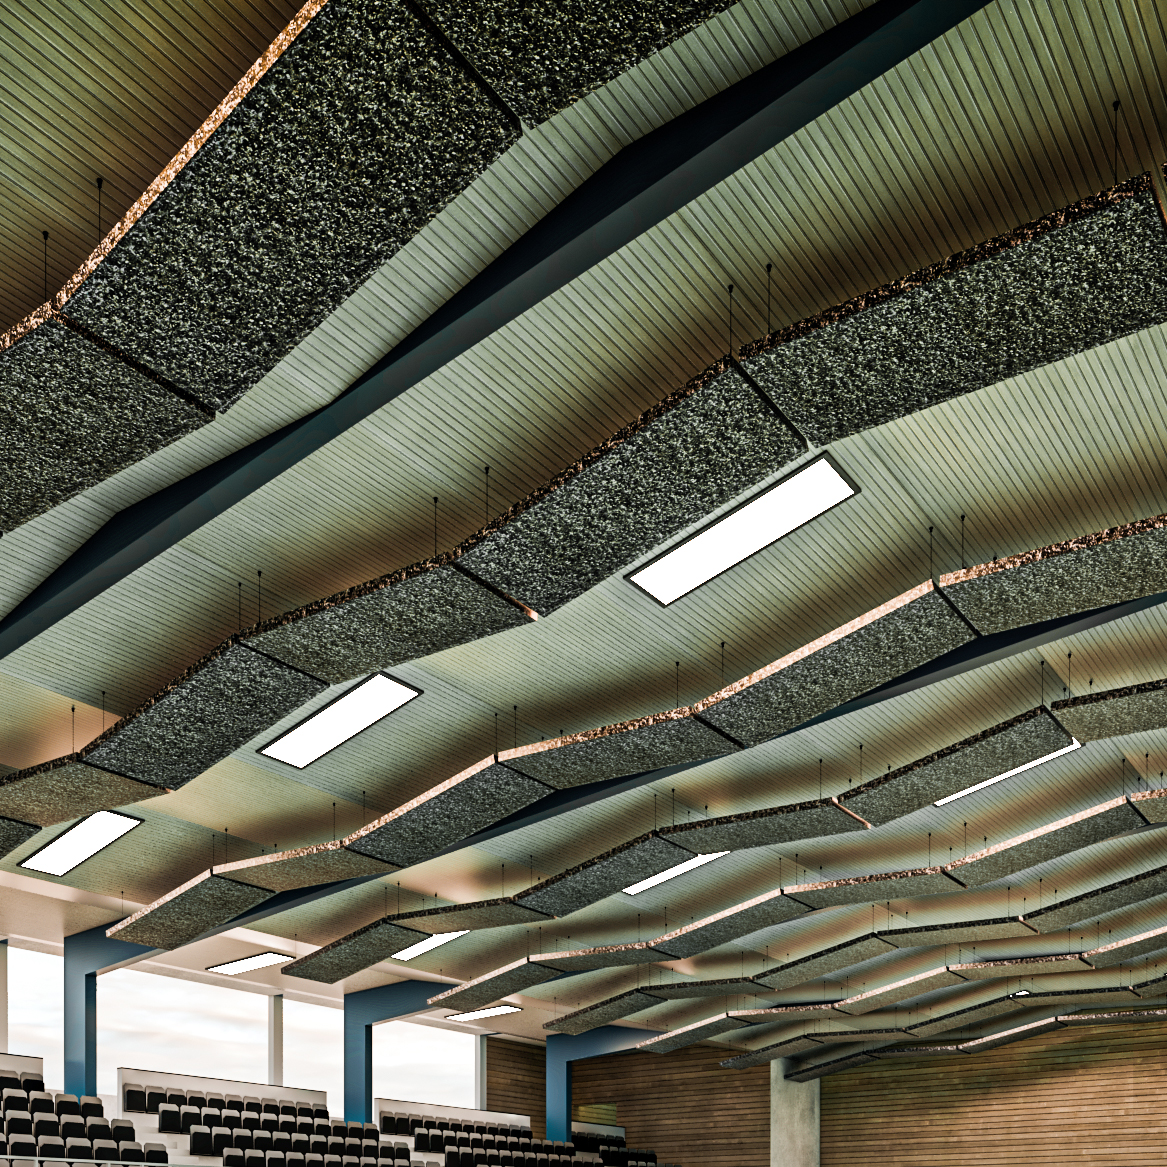 Stratocell Whisper lightweight sound absorbing acoustic panels at the ceiling of pool